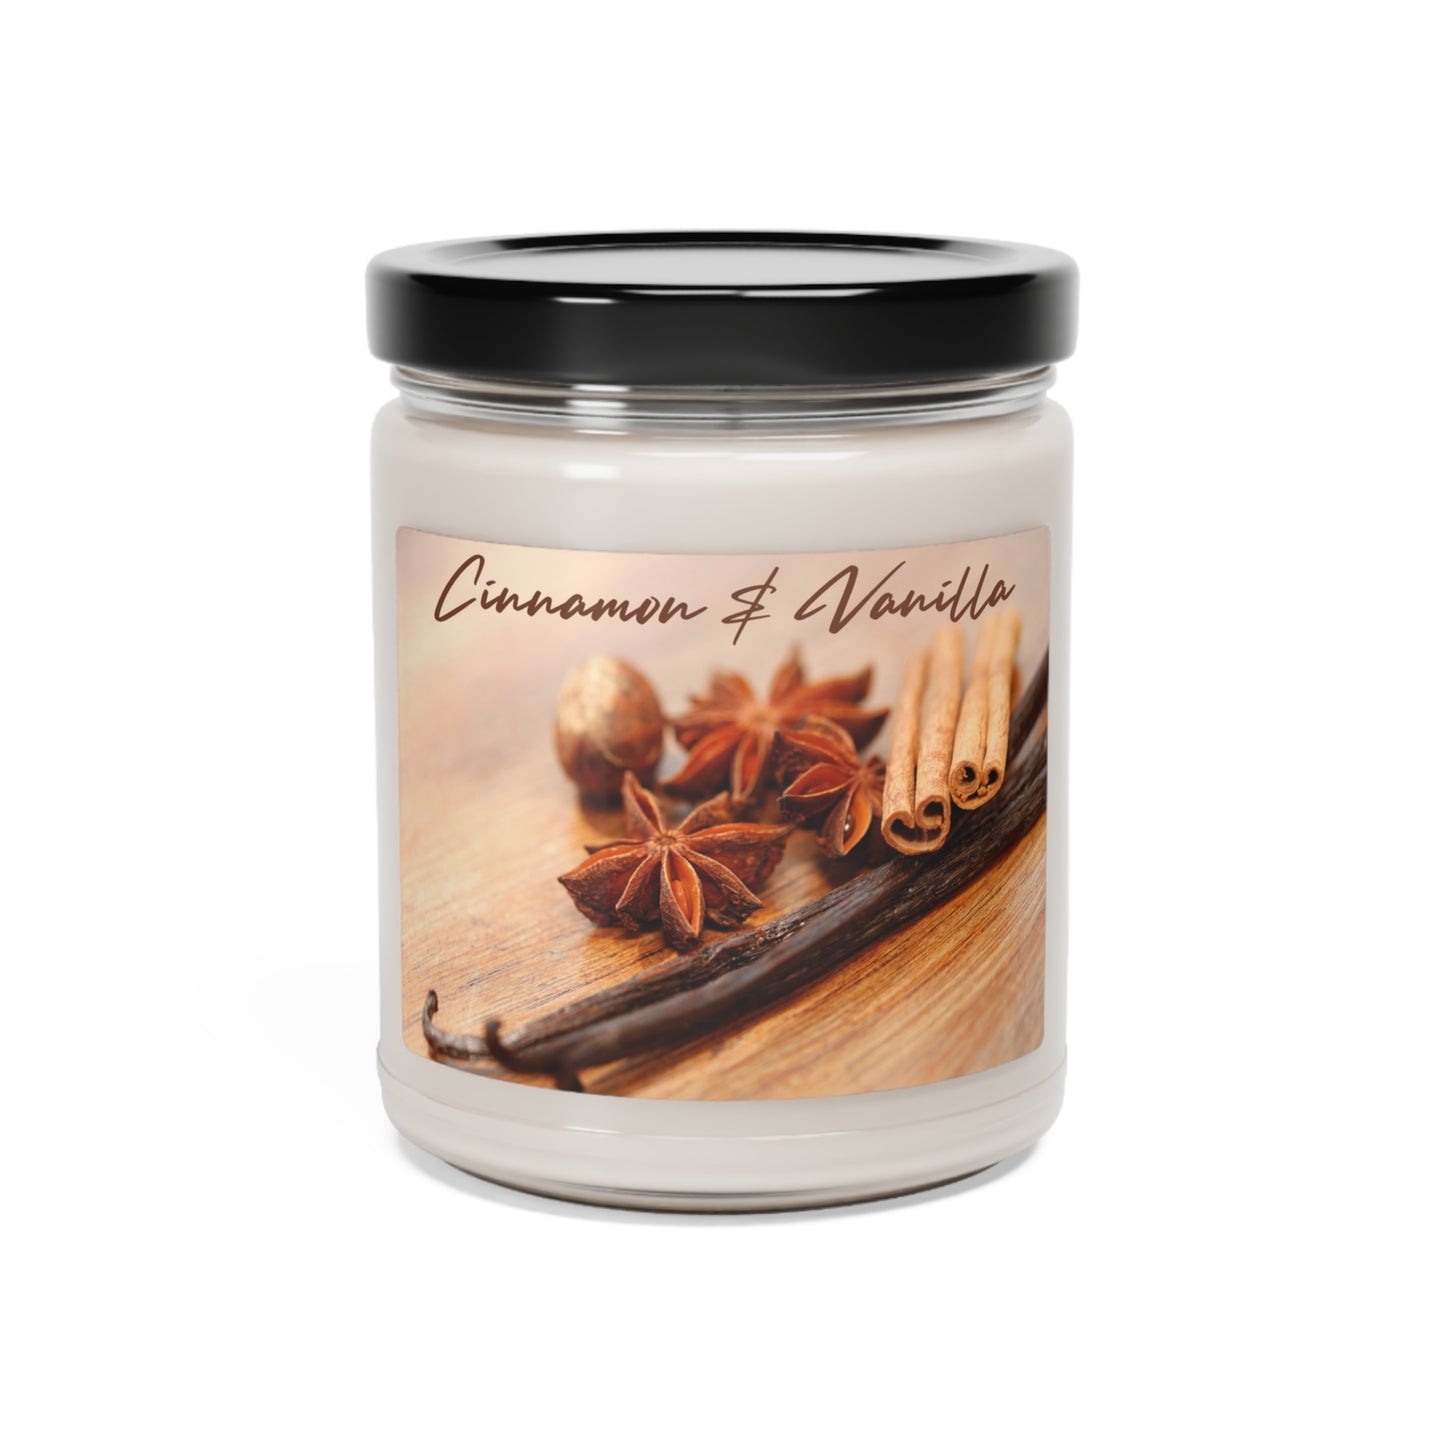 Warm and Aromatic Cinnamon & Vanilla Scented Soy Candle, 9oz Glass Jar